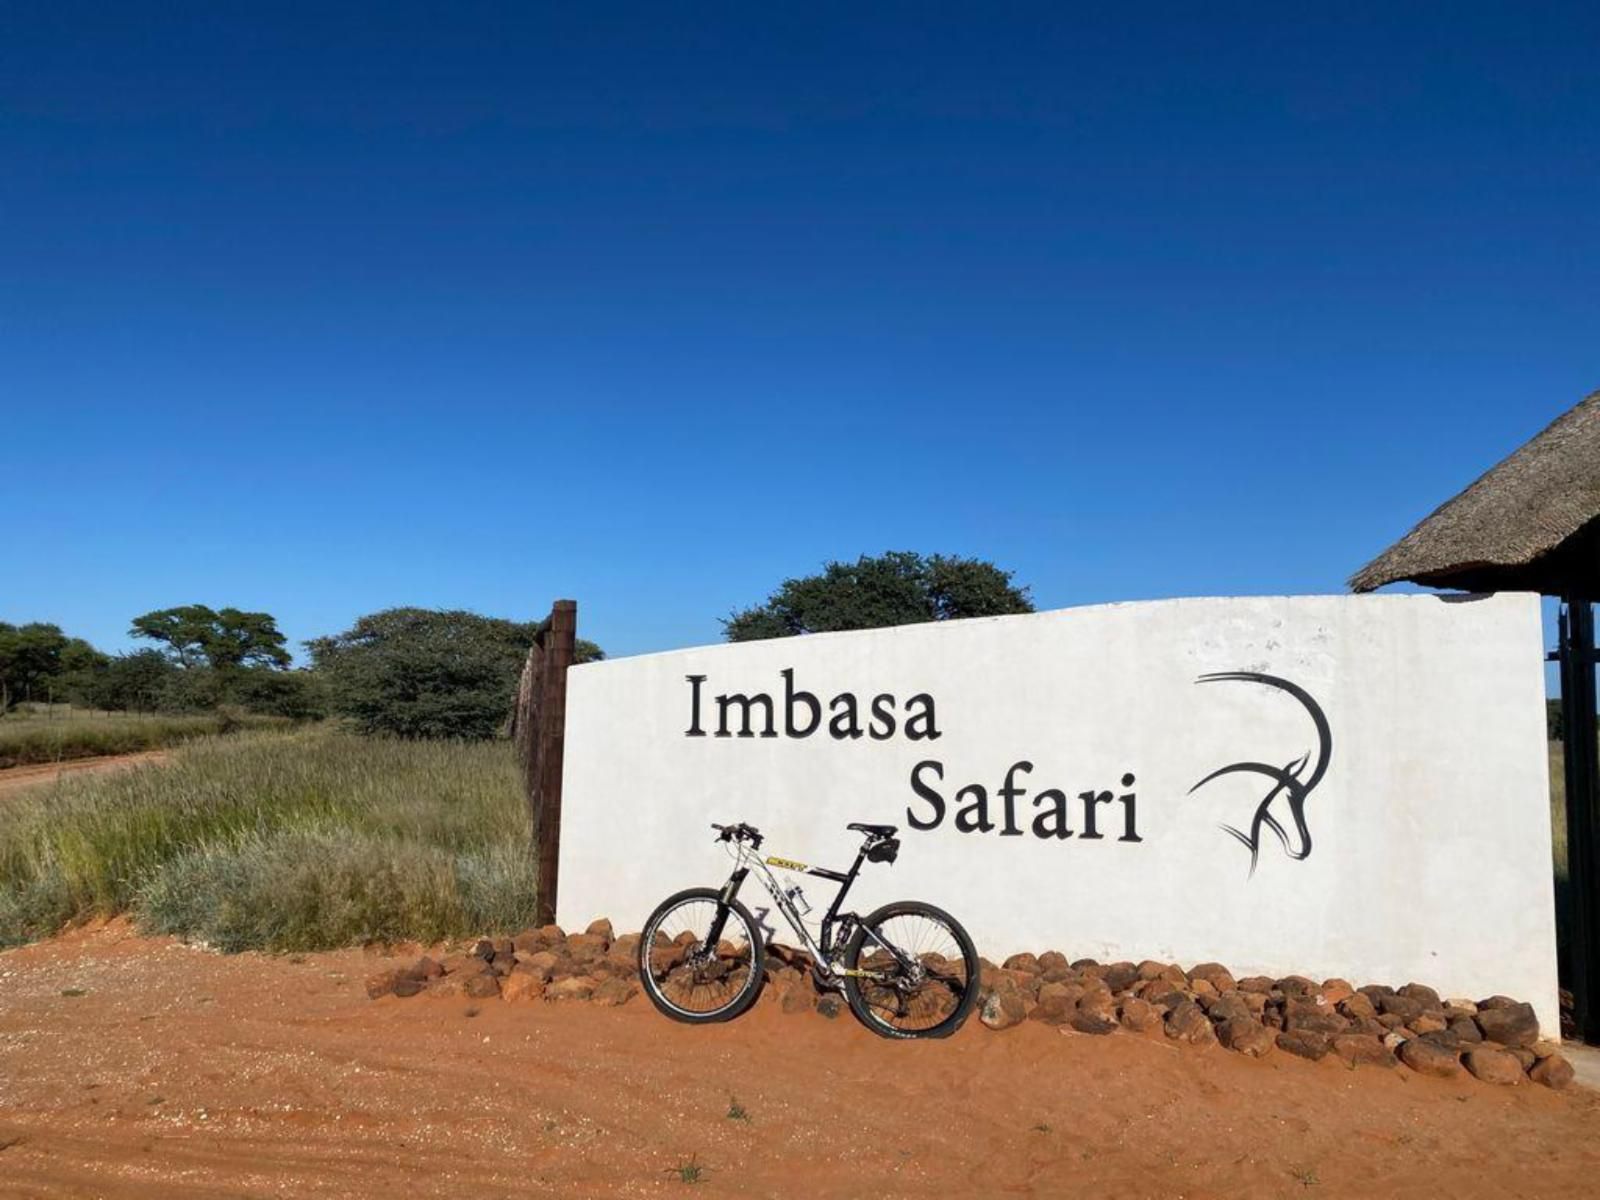 Imbasa Safari Lodge Mokala National Park Northern Cape South Africa Complementary Colors, Bicycle, Vehicle, Sign, Cycling, Sport, Desert, Nature, Sand, Mountain Bike, Funsport